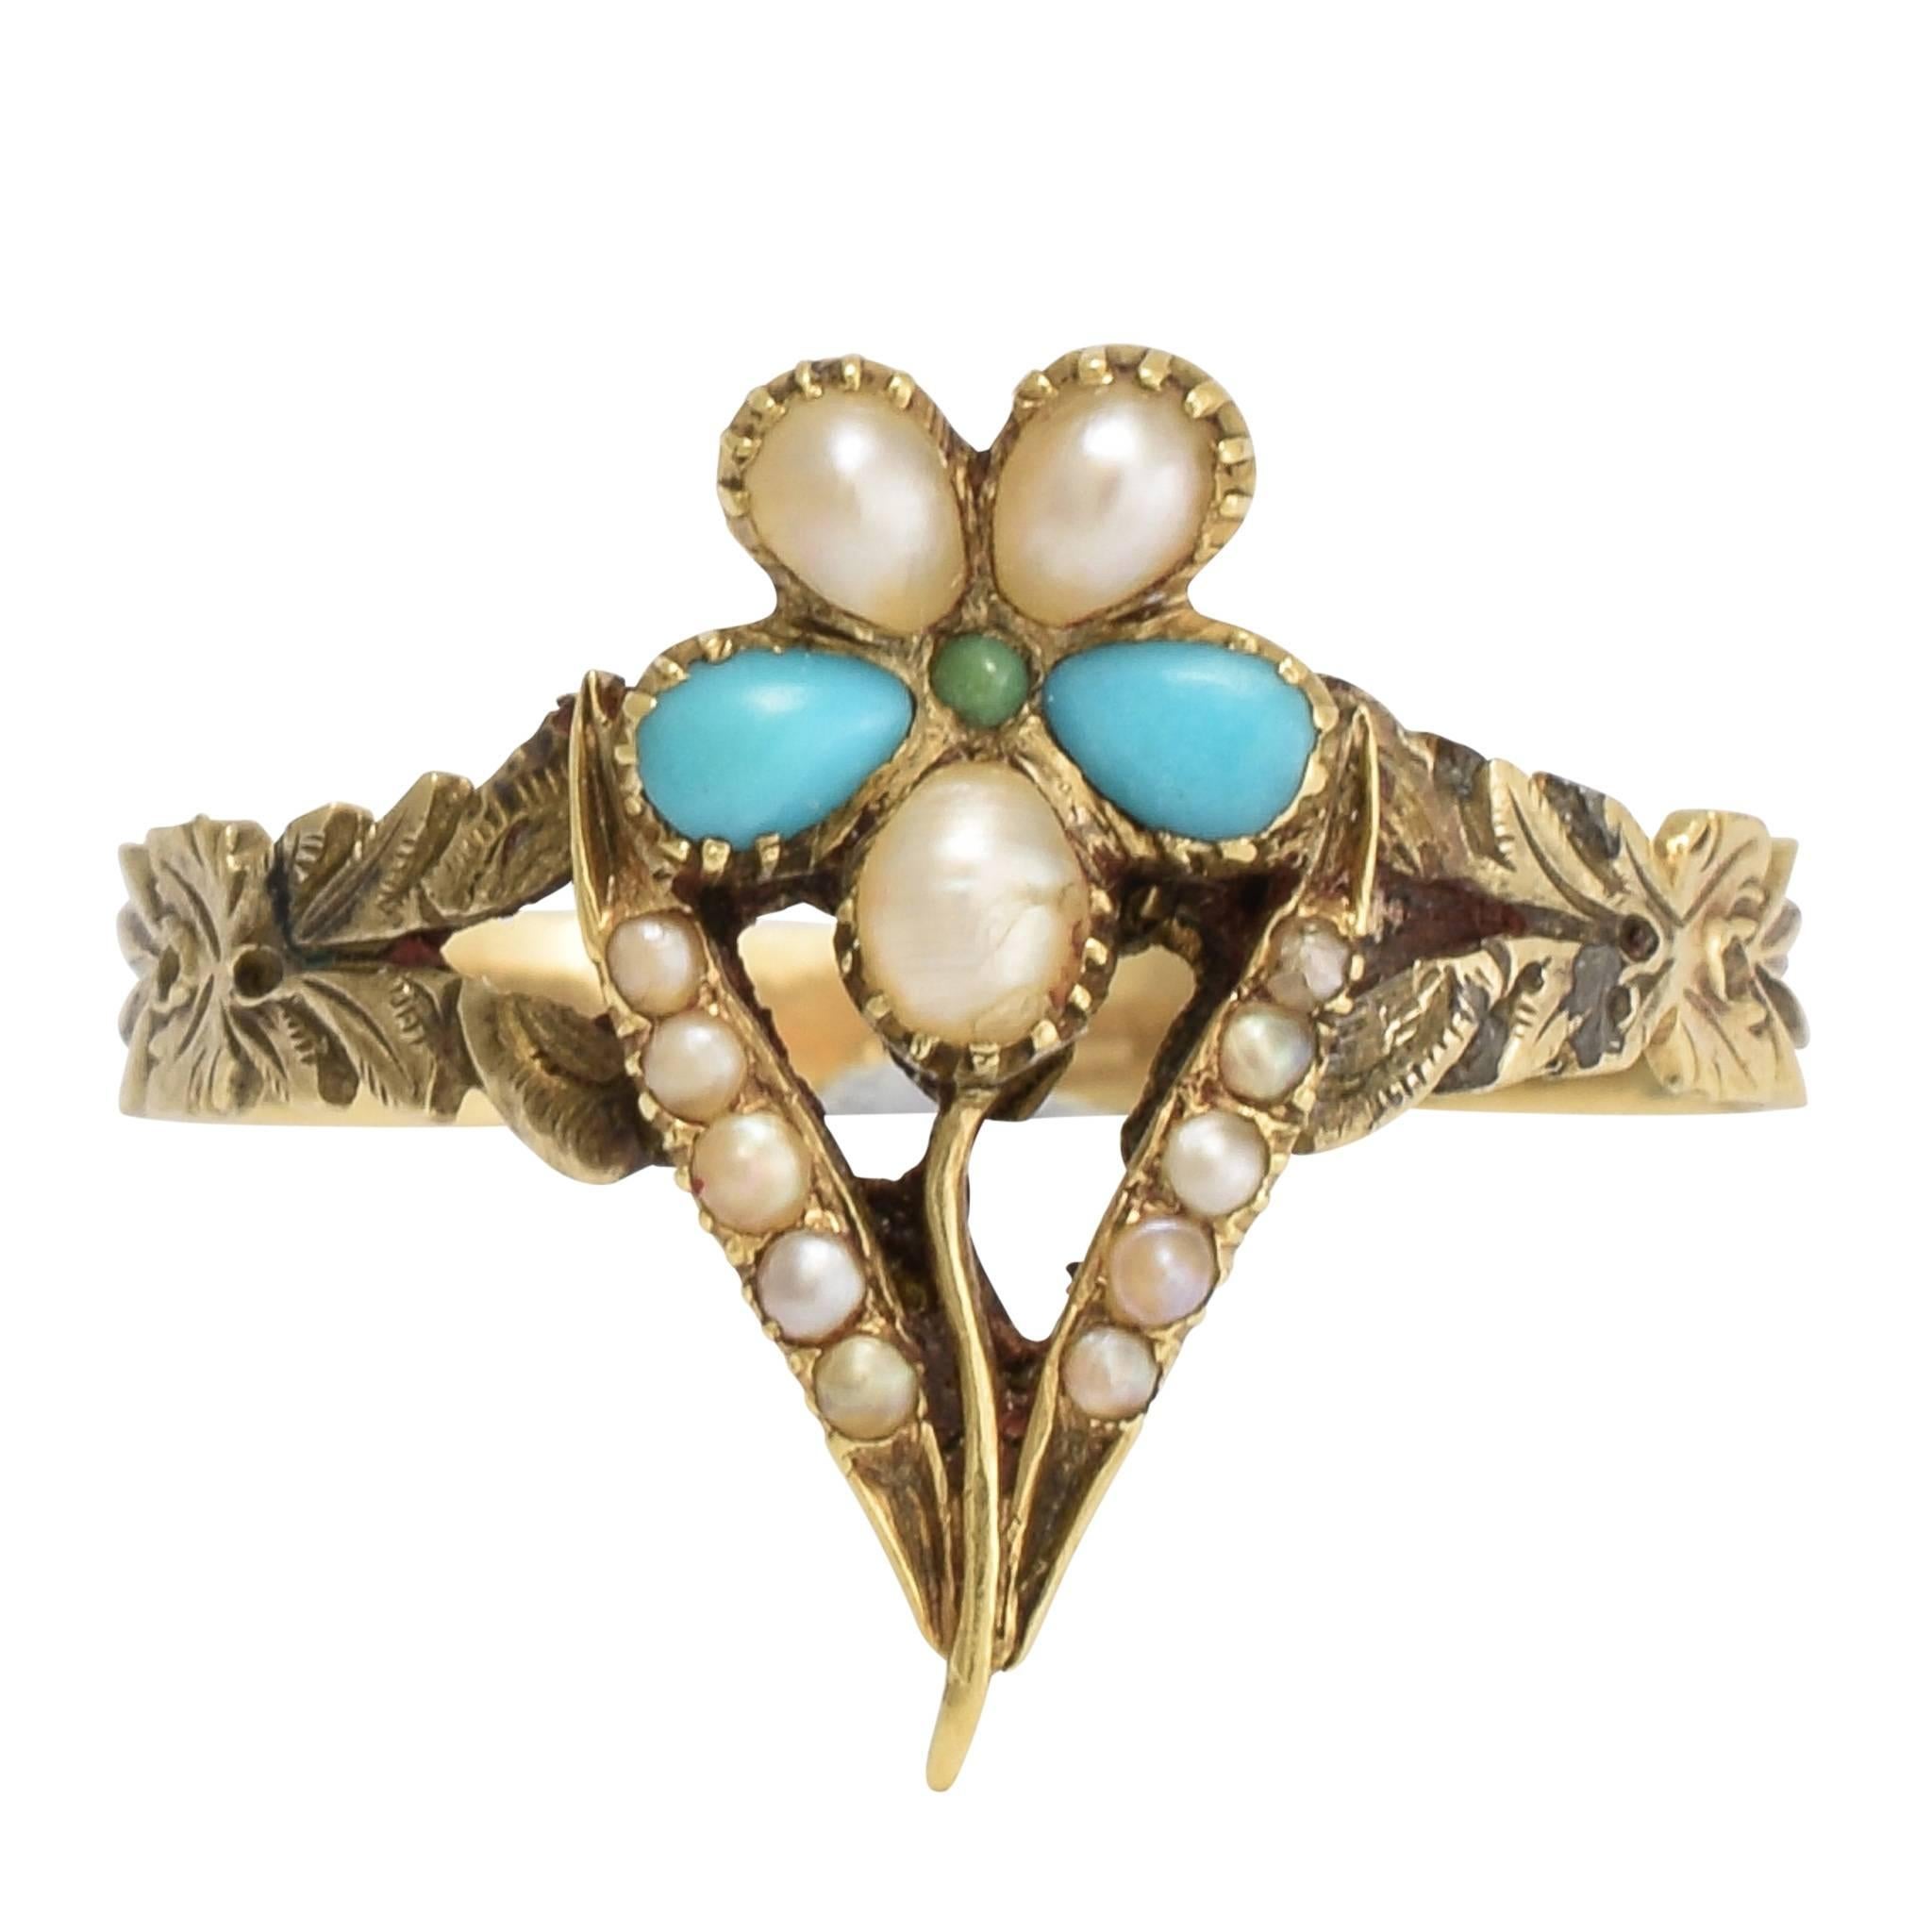 Antique Regency Period Turquoise Pearl Pansy Ring